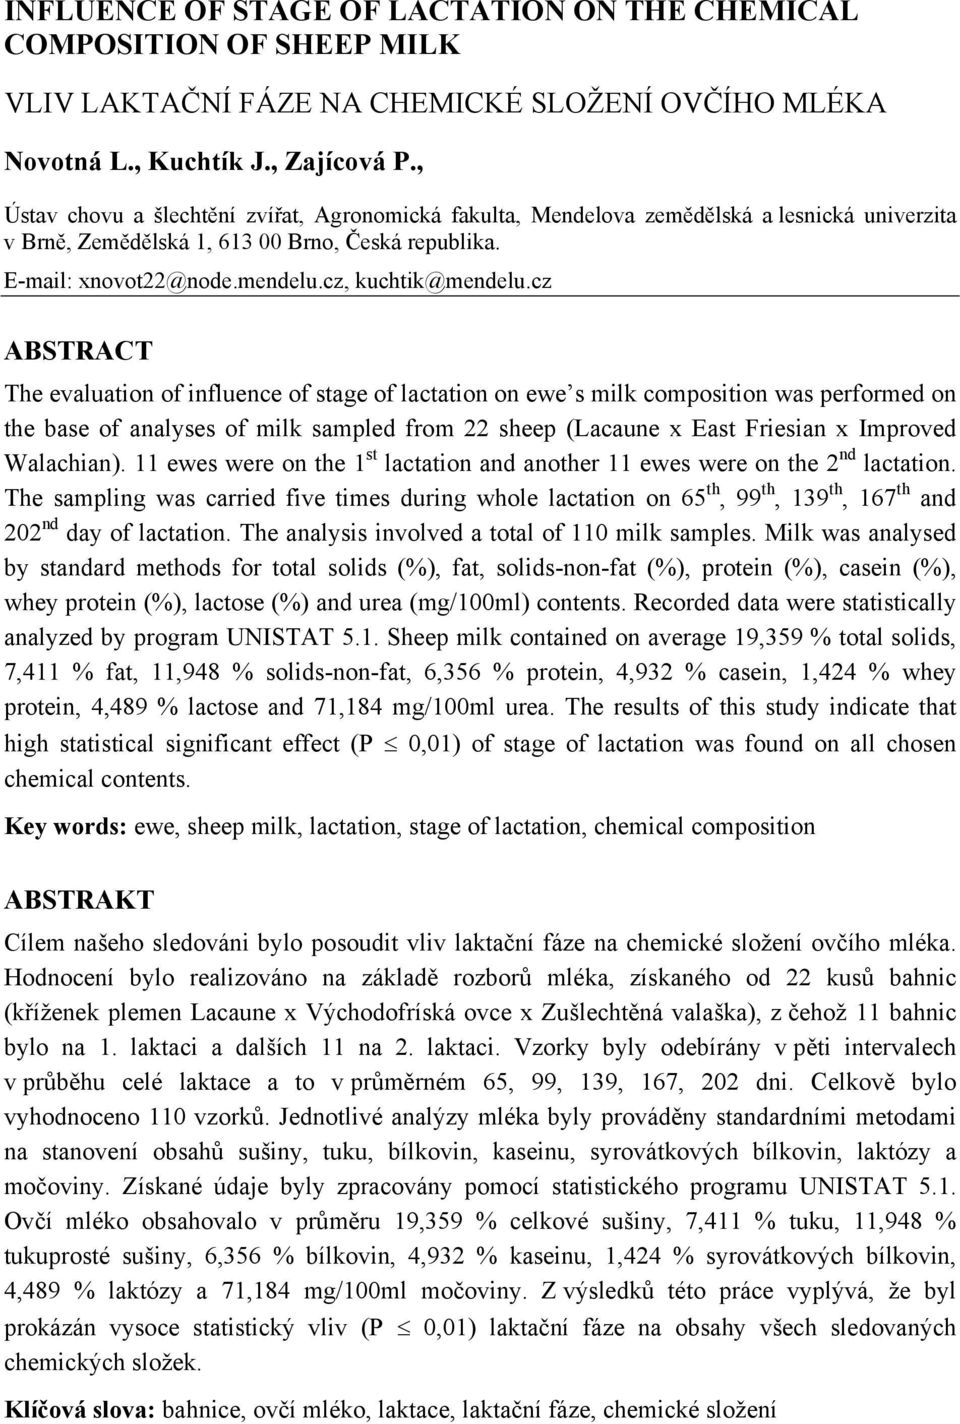 cz ABSTRACT The evaluation of influence of tage of lactation on ewe milk compoition wa performed on the bae of analye of milk ampled from 22 heep (Lacaune x Eat Frieian x Improved Walachian).